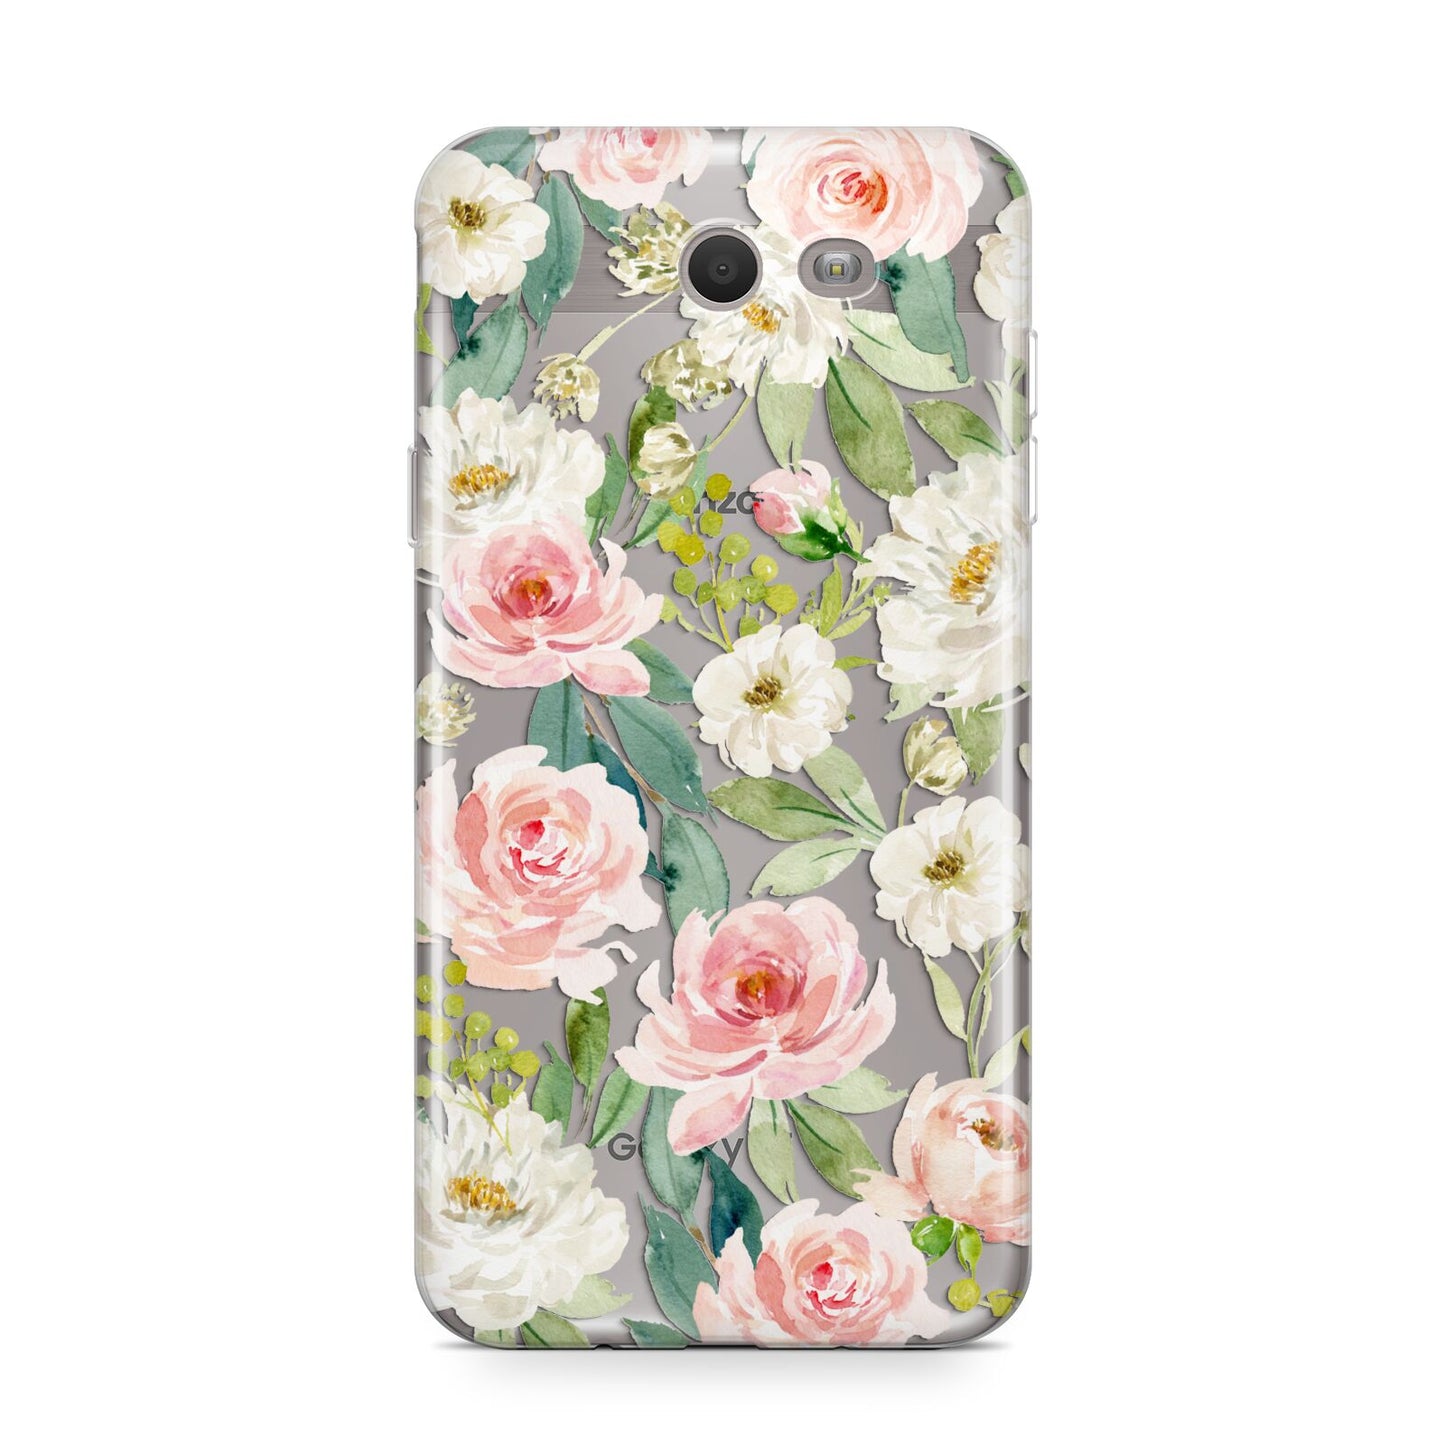 Watercolour Peonies Roses and Foliage Samsung Galaxy J7 2017 Case